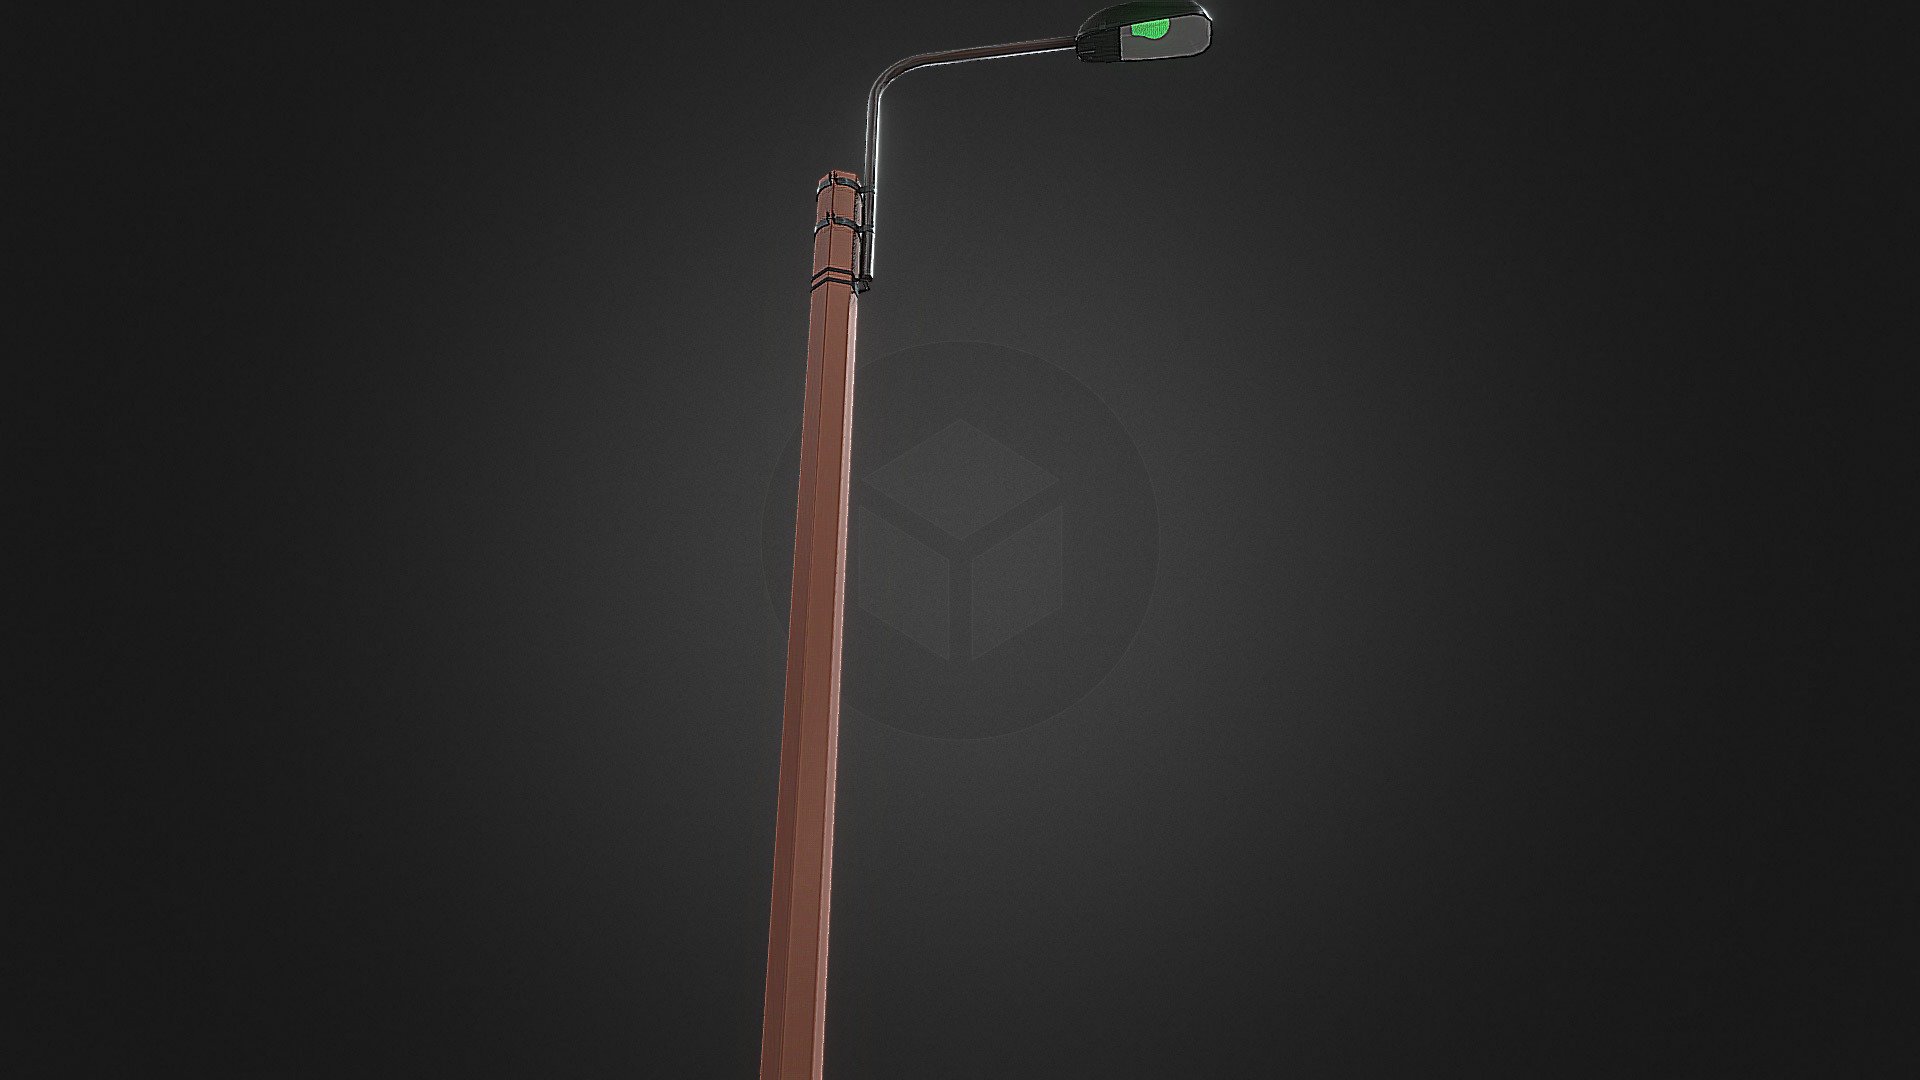 3D model of a pole light can be used in city/street scene or in your VFX productions - Street light 03 - Buy Royalty Free 3D model by Ares Studio (@aresstudio) 3d model